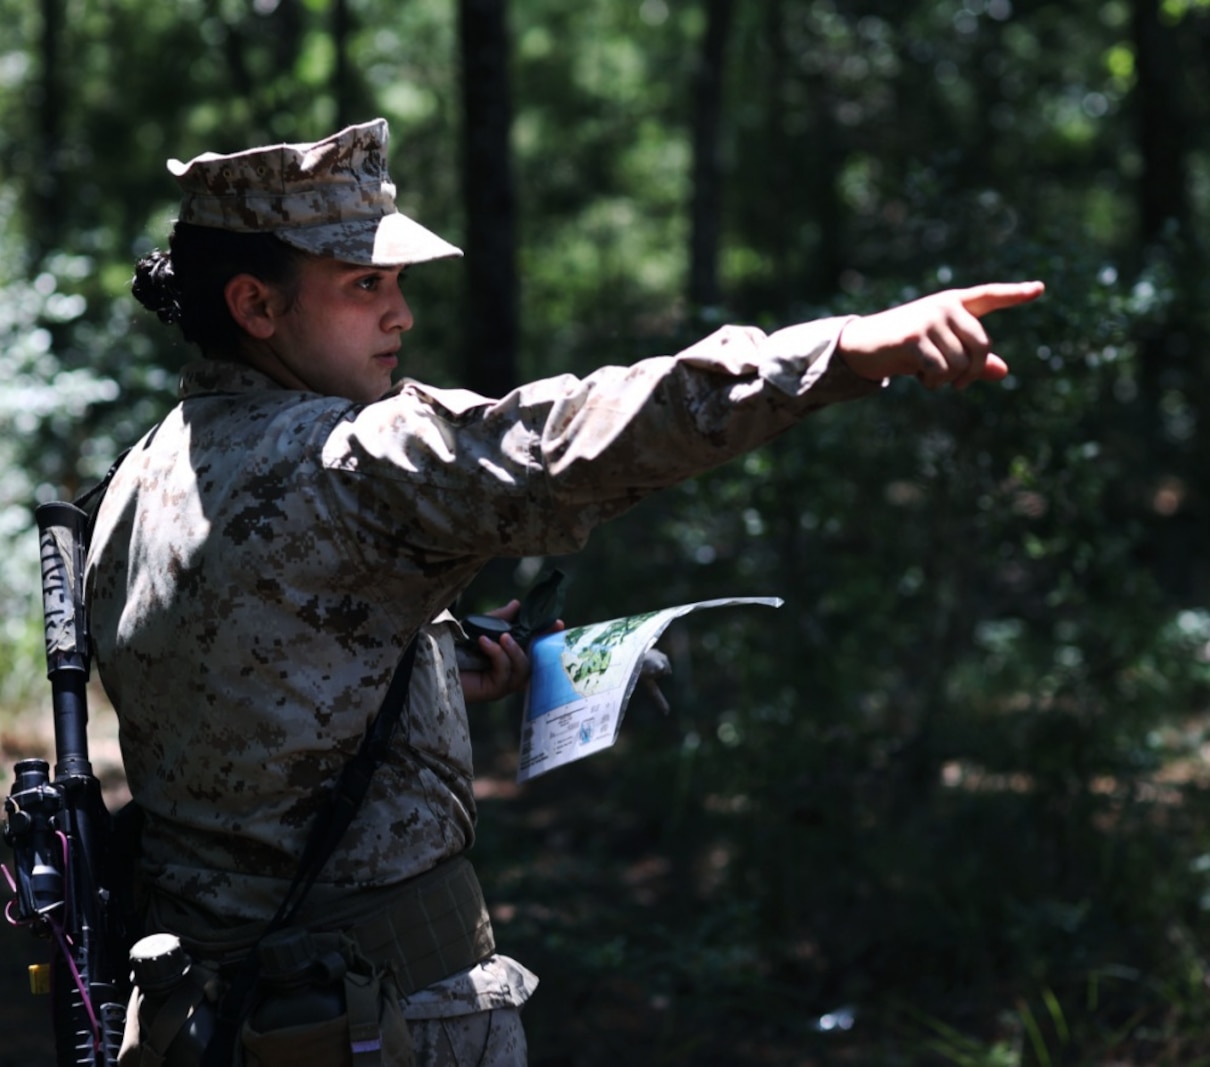 Recruit Raquel Rivera with Papa Company, 4th Recruit Training Battalion, gives directions during the land navigation course aboard Marine Corps Recruit Depot Parris Island, S.C, June 14, 2020. Land navigation is part of Basic Warrior Training and is designed to teach recruits how to use a compass and map for navigation.